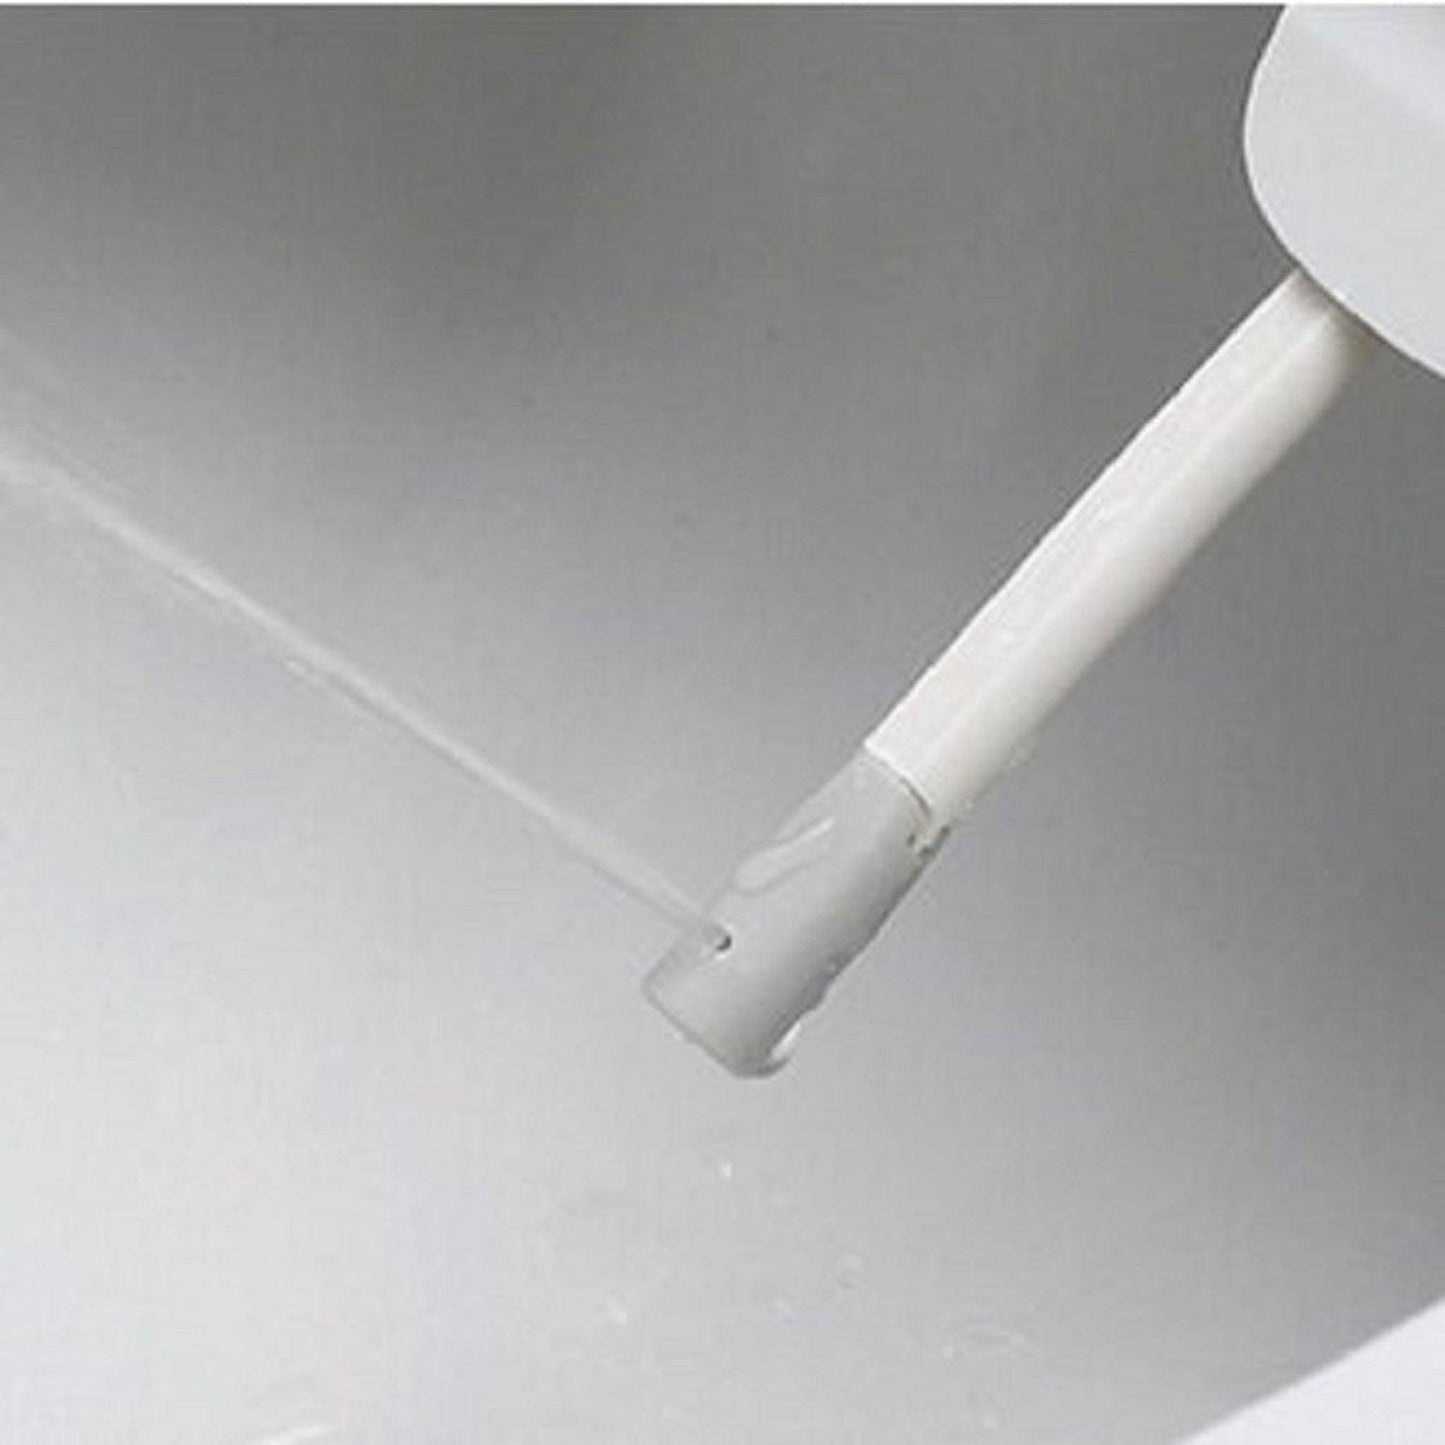 Aim to Wash! 20" Elongated White Electric Smart Bidet Toilet Seat With Knob Control Operation